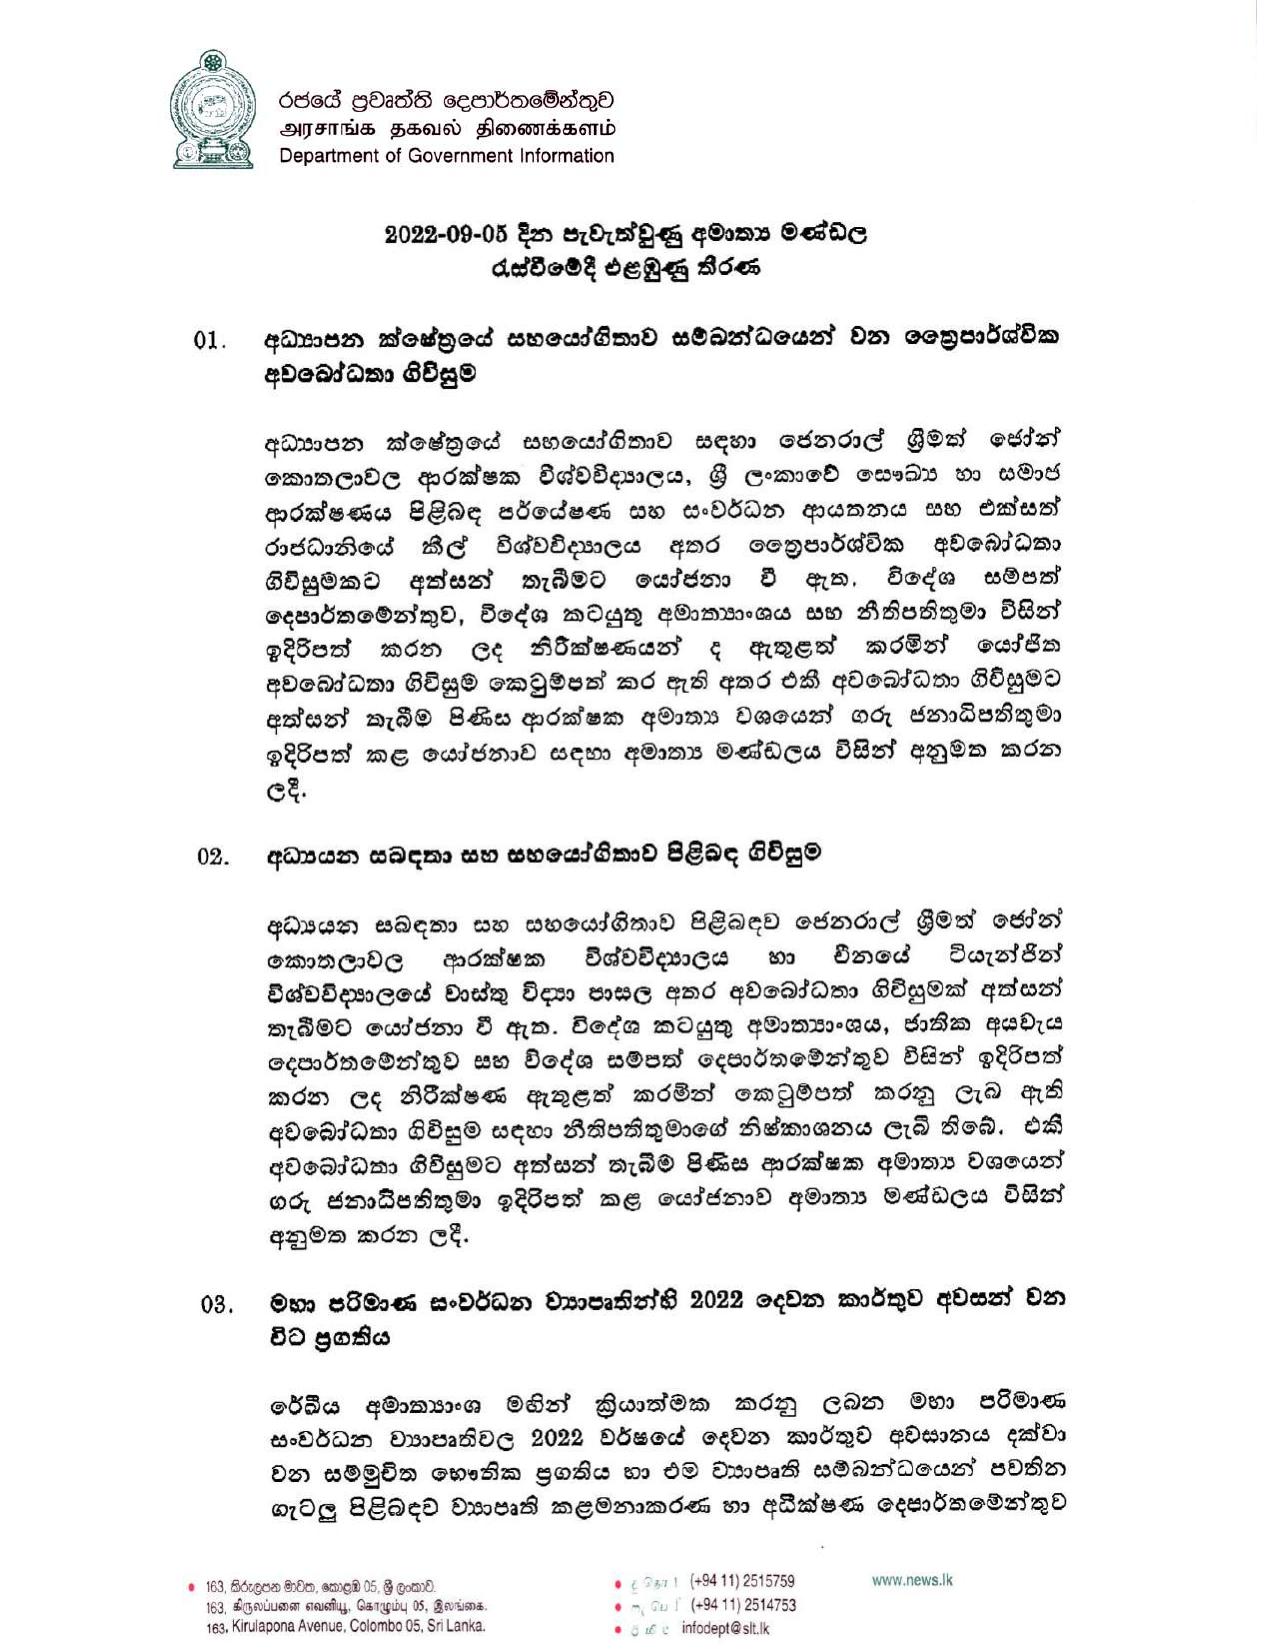 Cabinet Decision on 05.09.2022 page 001